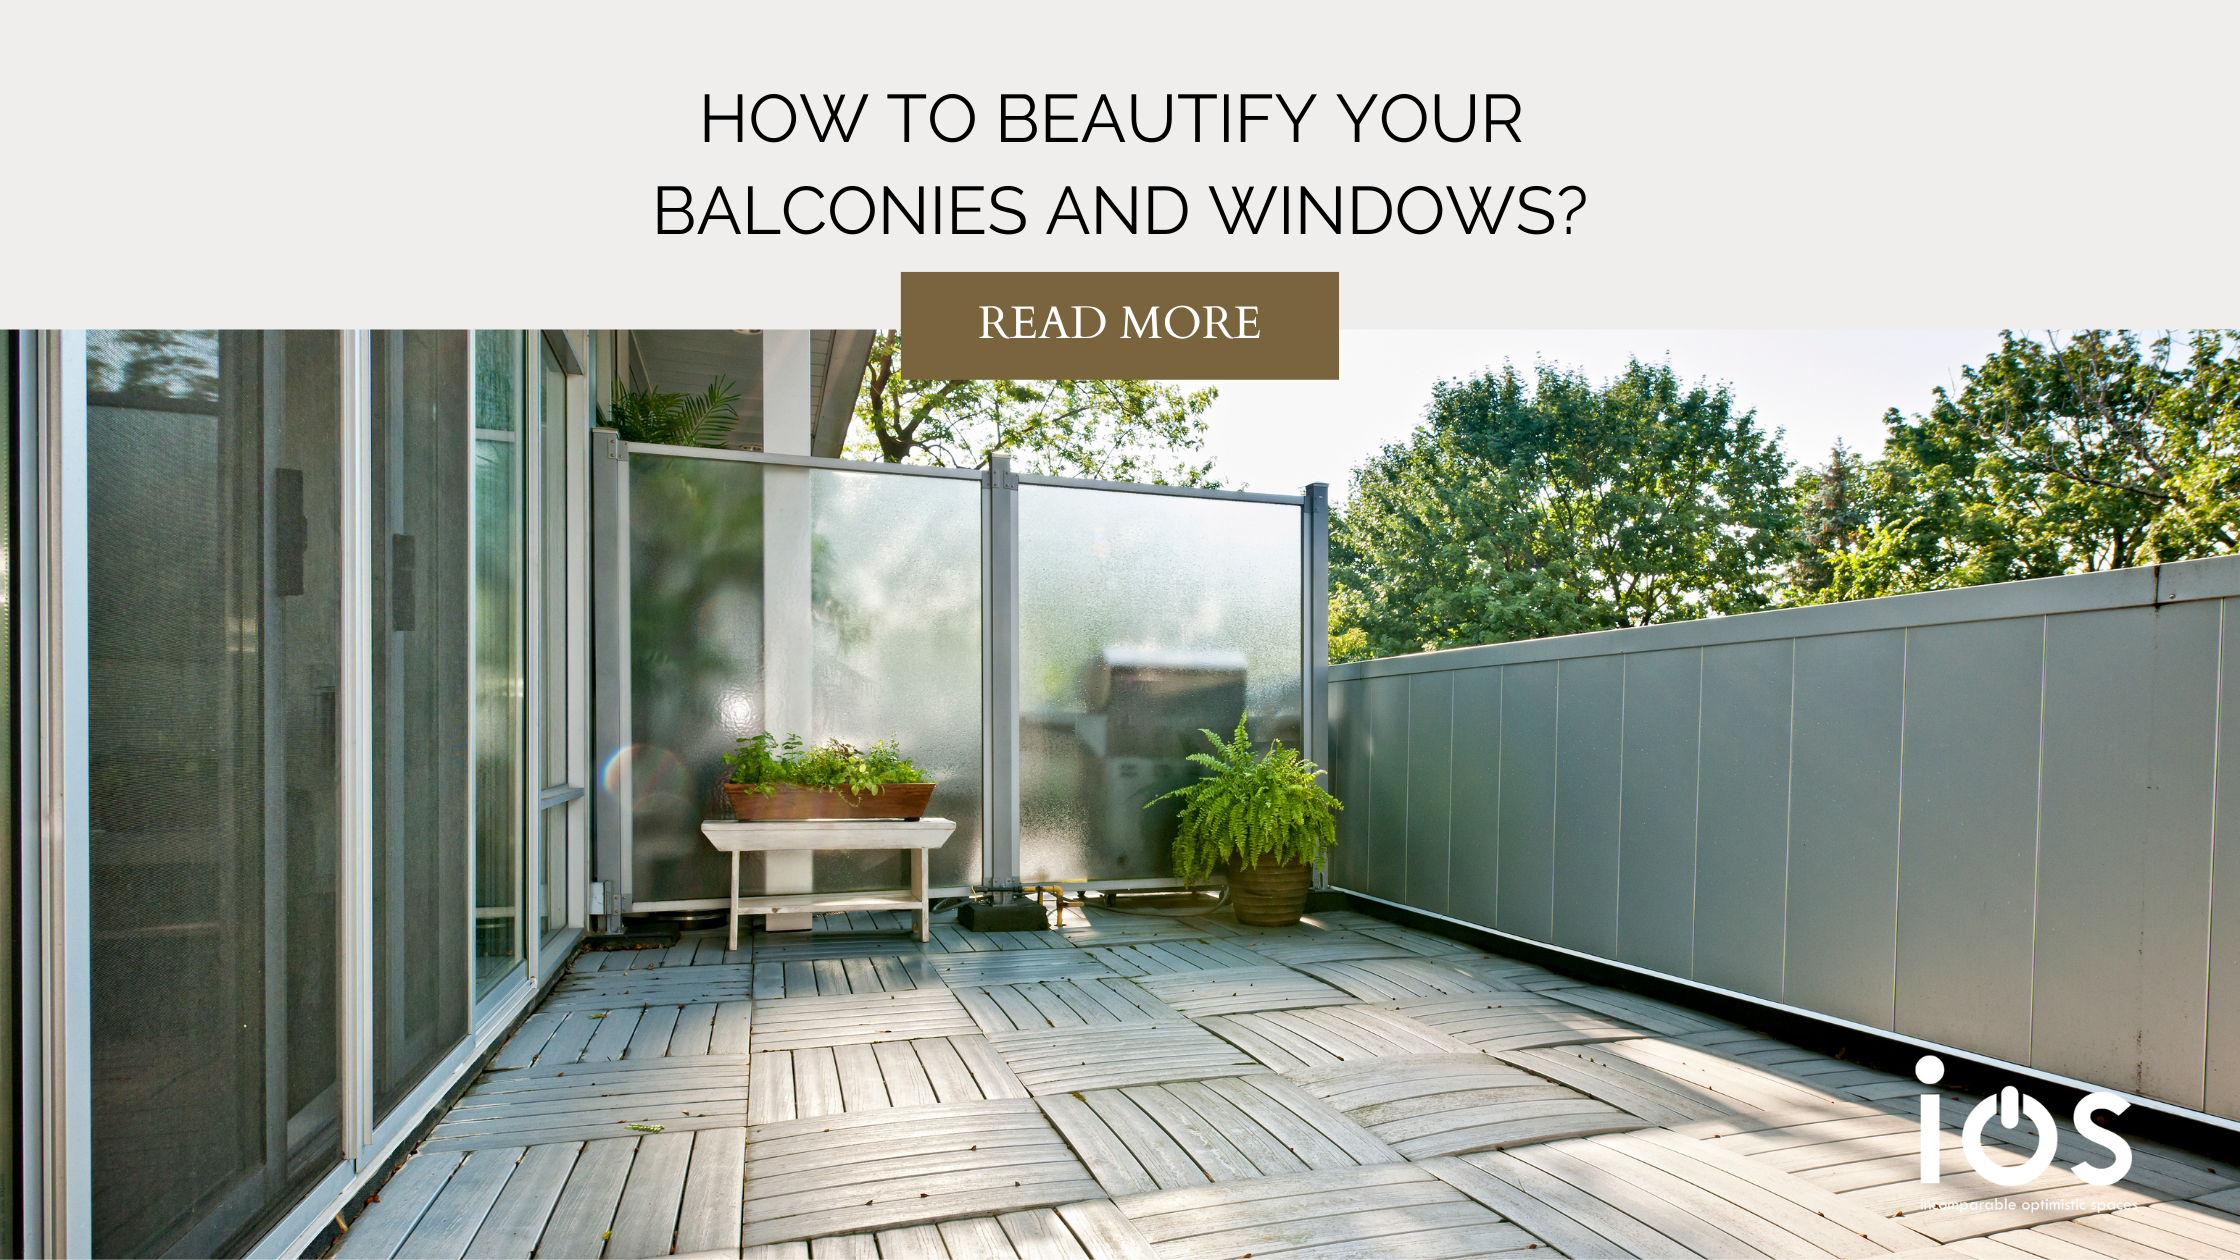 How to beautify your windows and balconies?